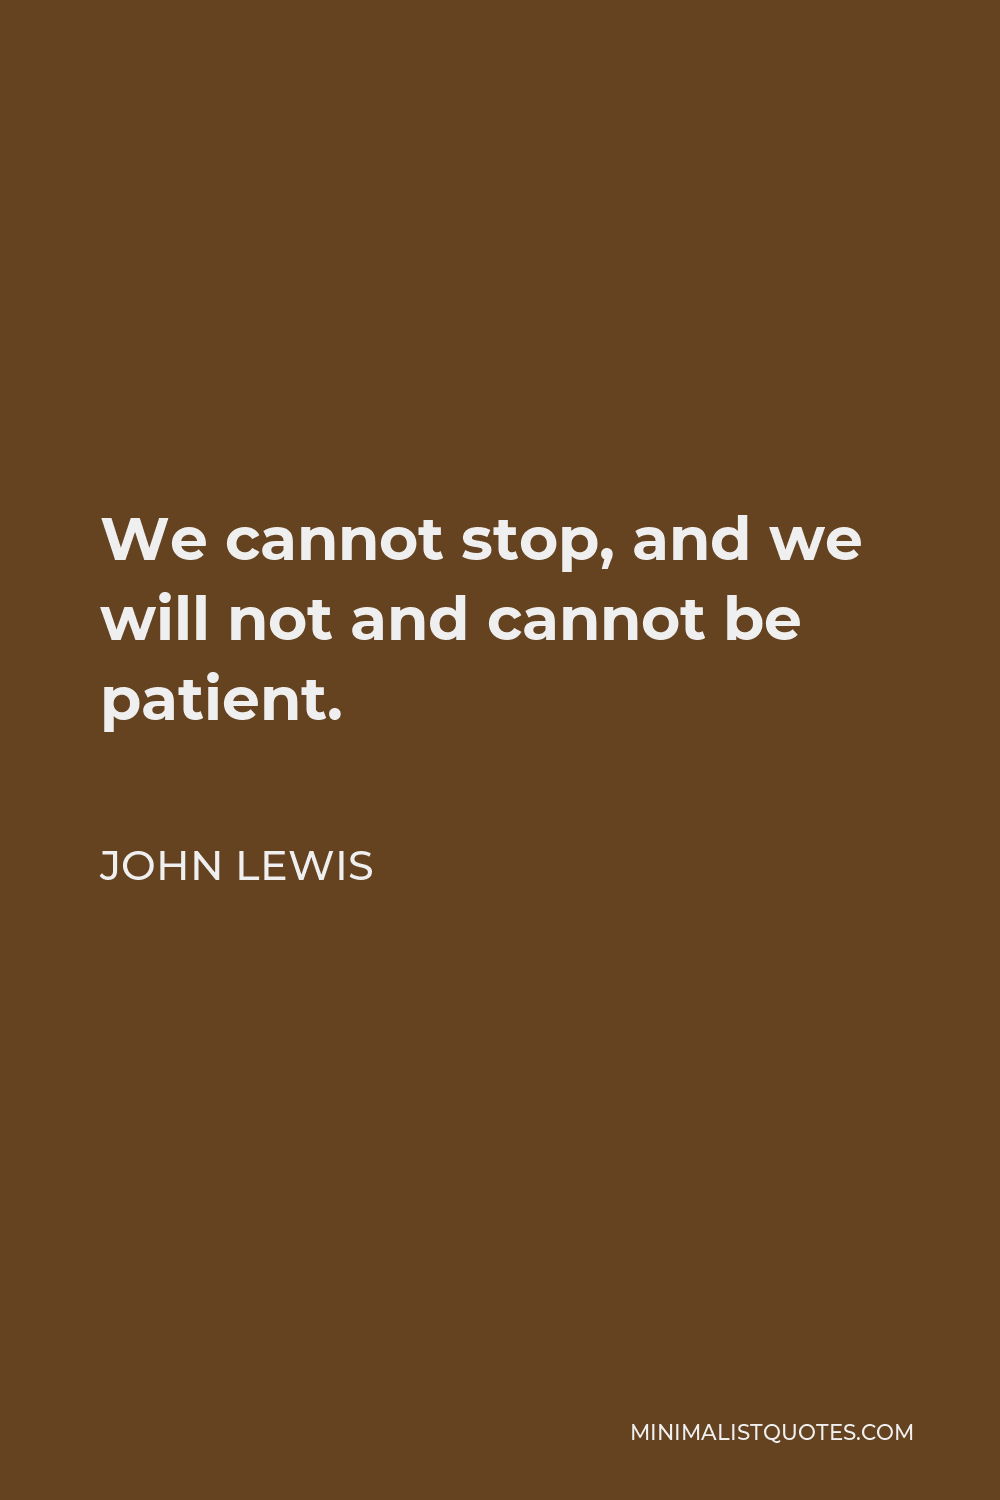 John Lewis Quote - We cannot stop, and we will not and cannot be patient.